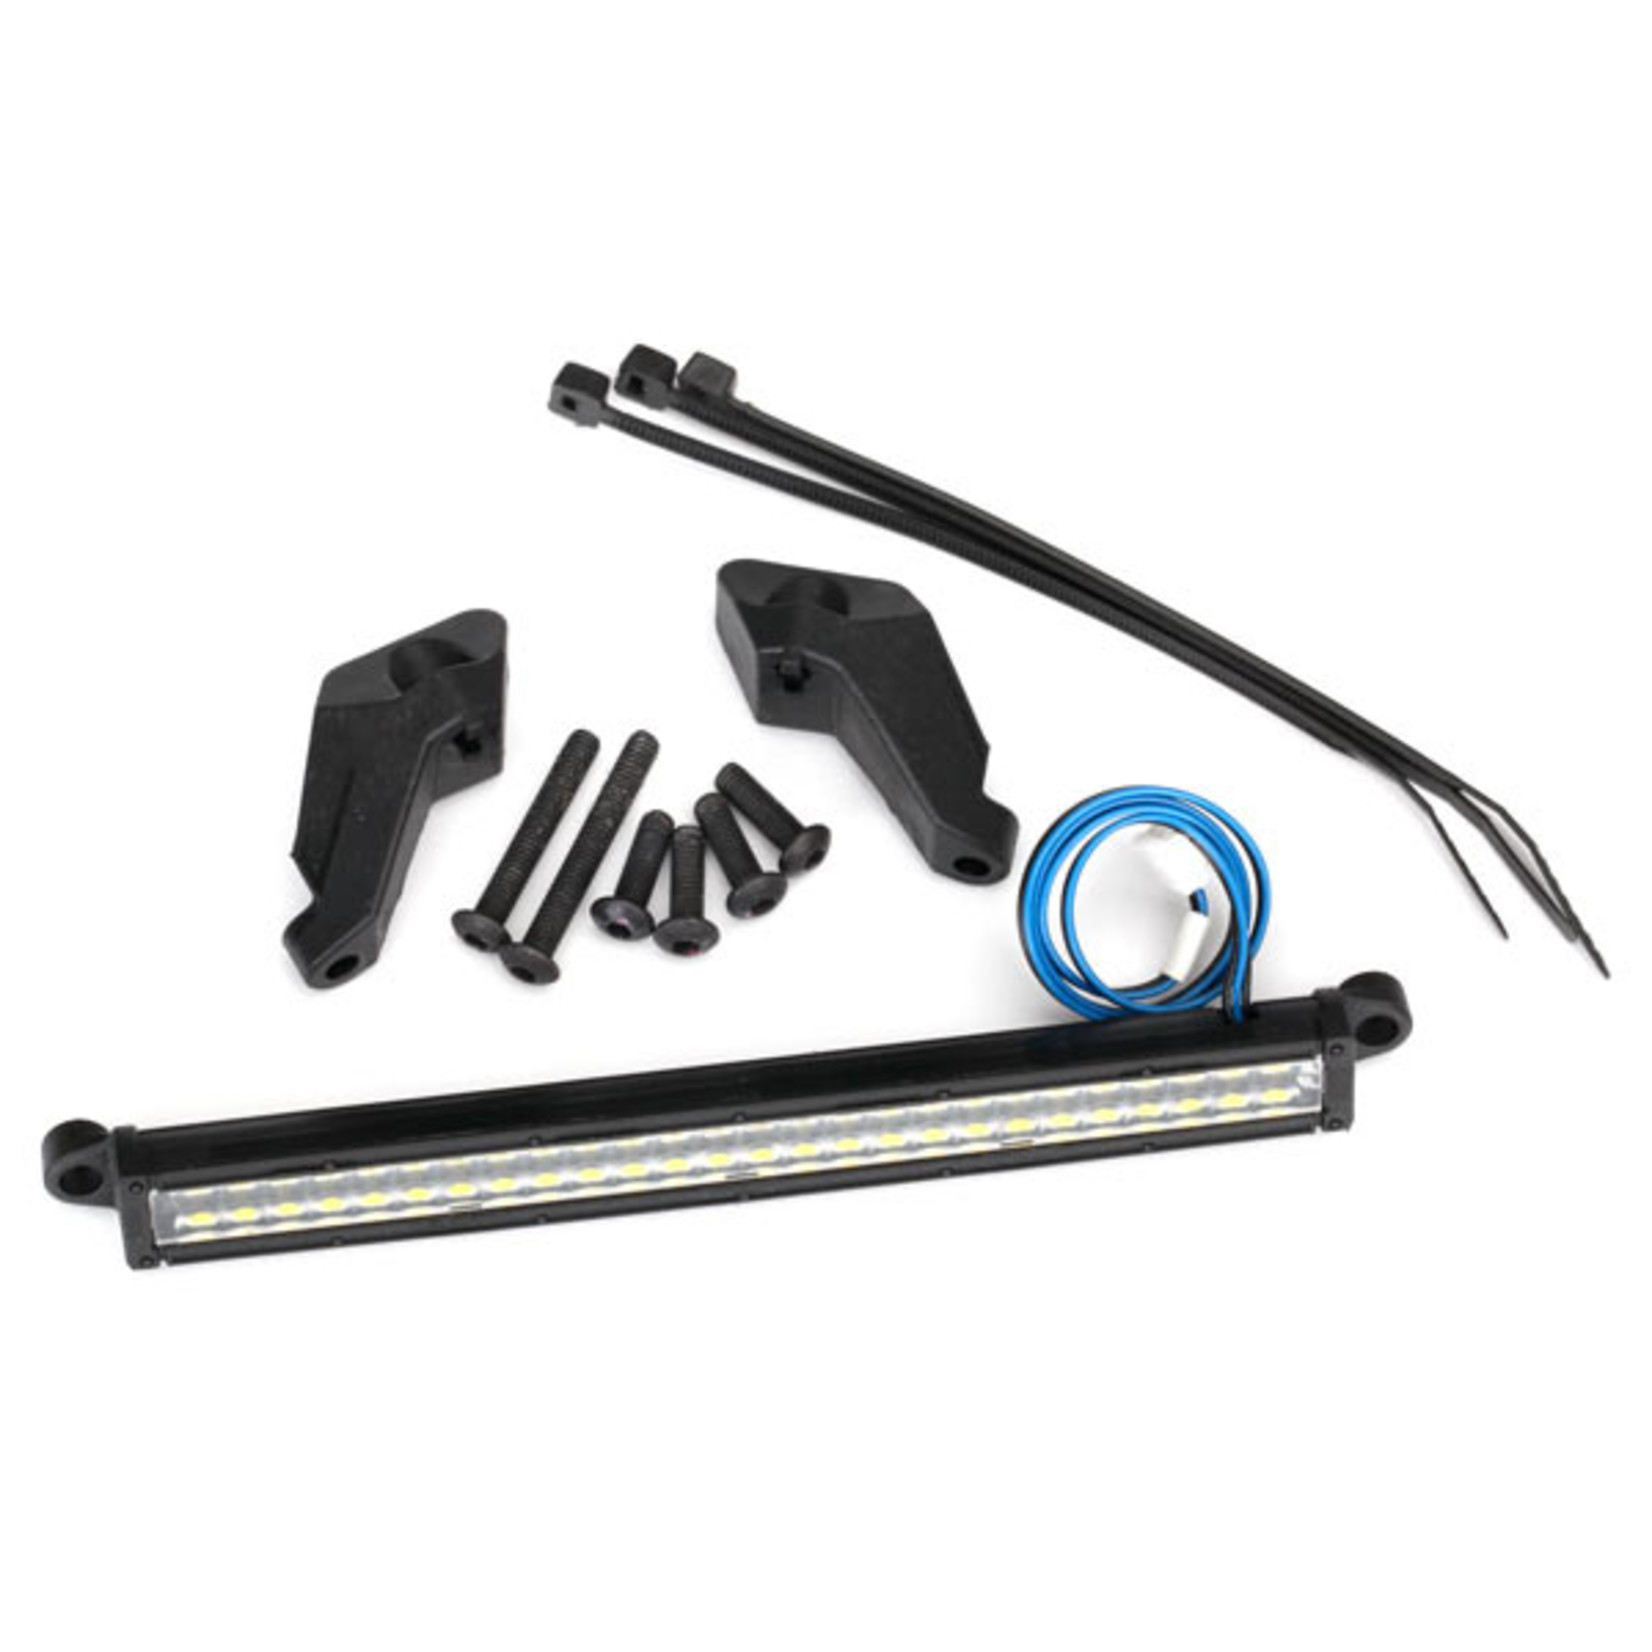 Traxxas 8486 - LED light bar, front (high-voltage) (52 whi